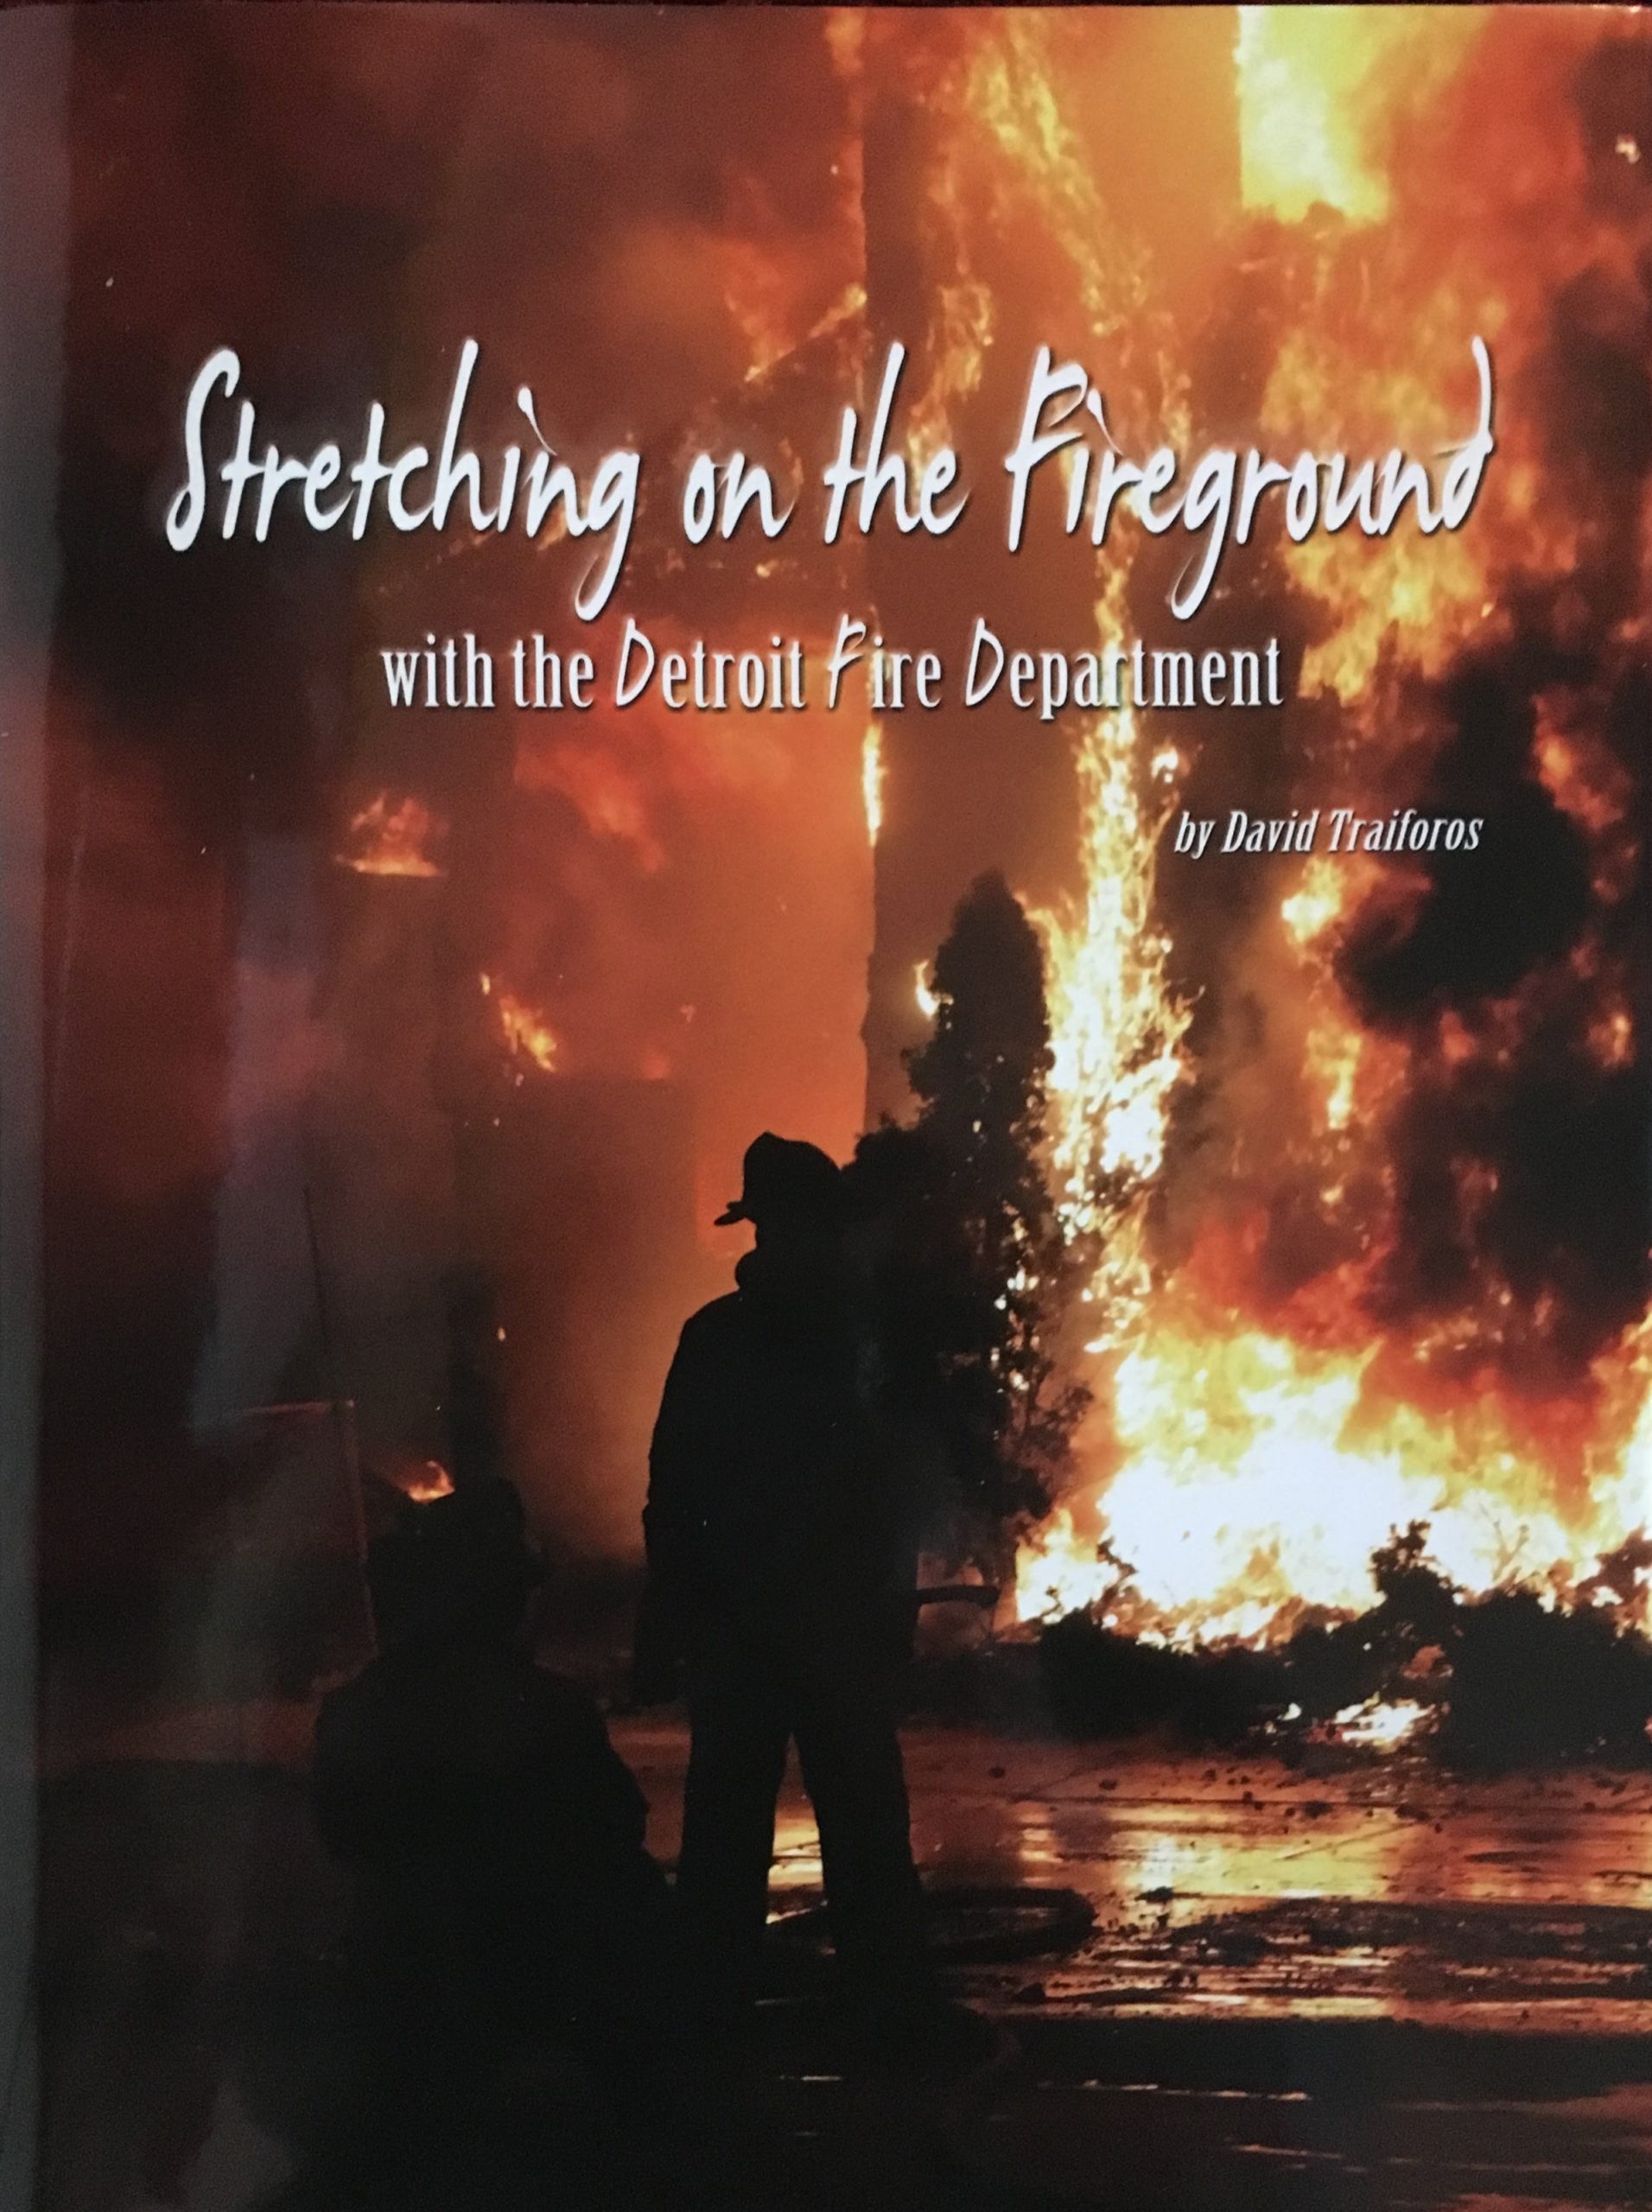 Stretching the Fireground with the Detroit FD